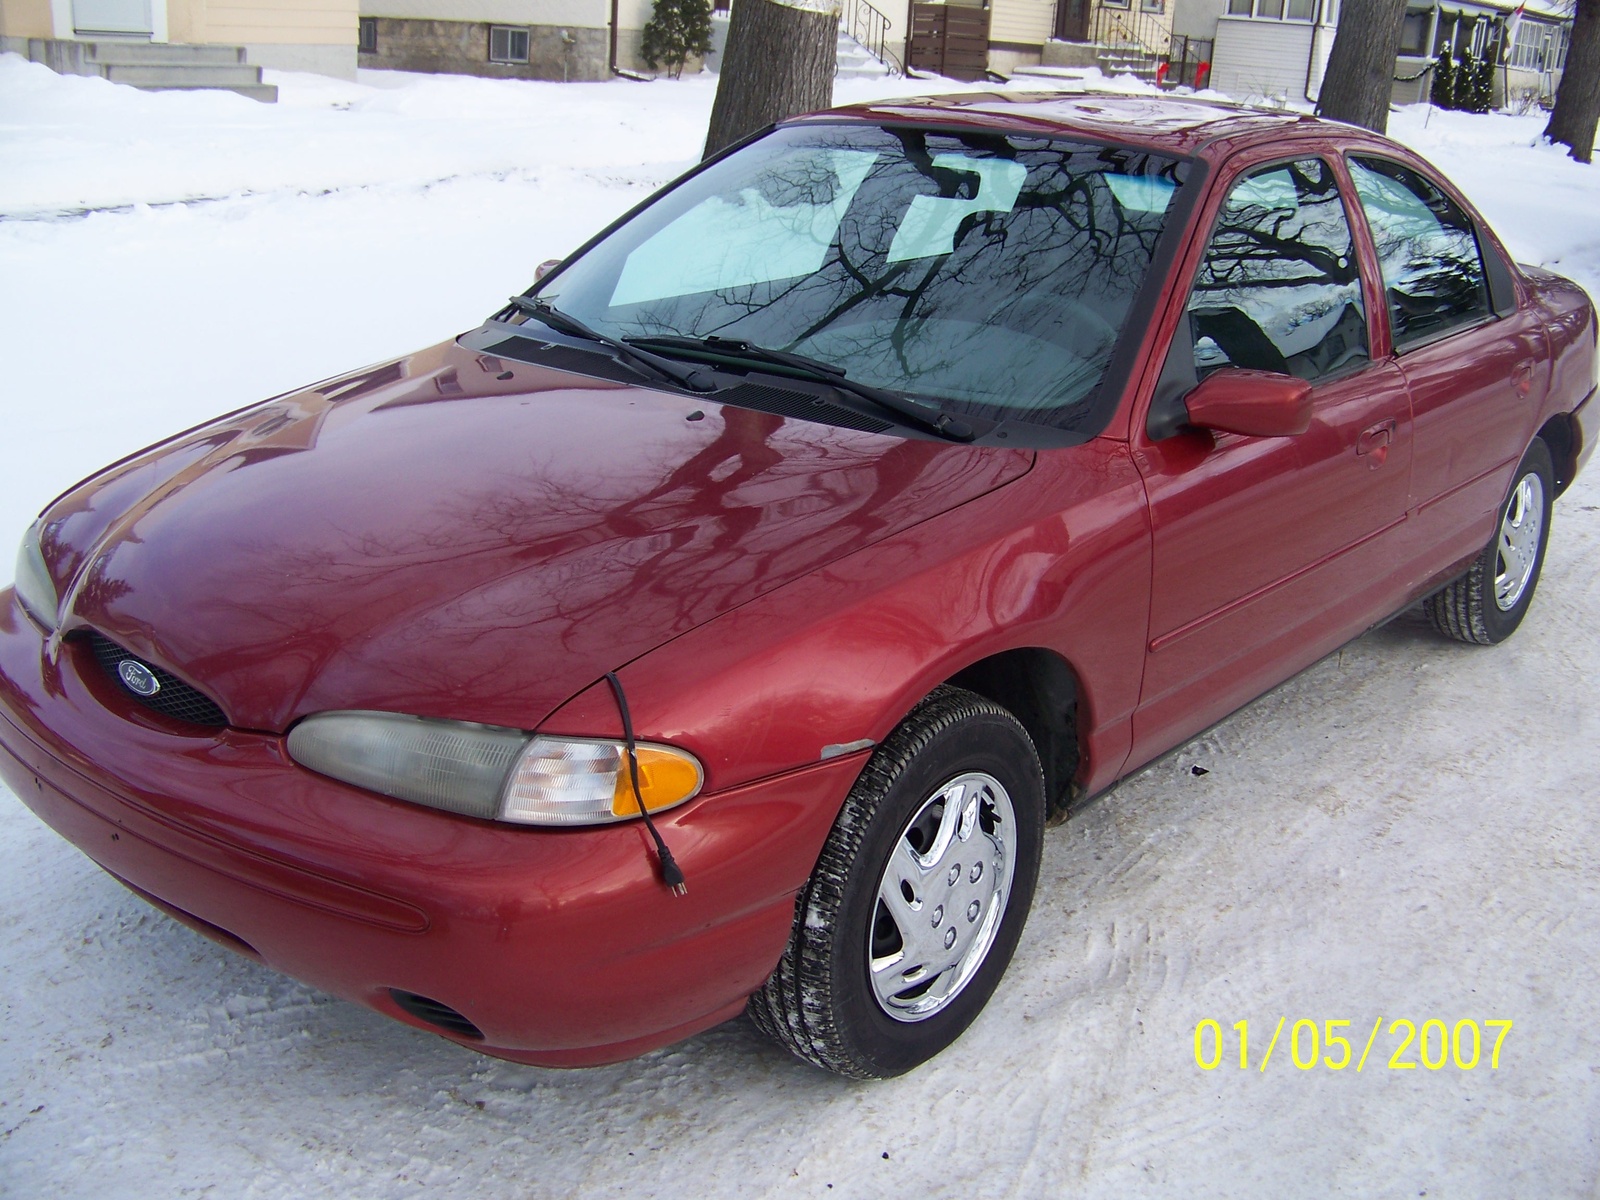 1996 Ford contour used parts #9